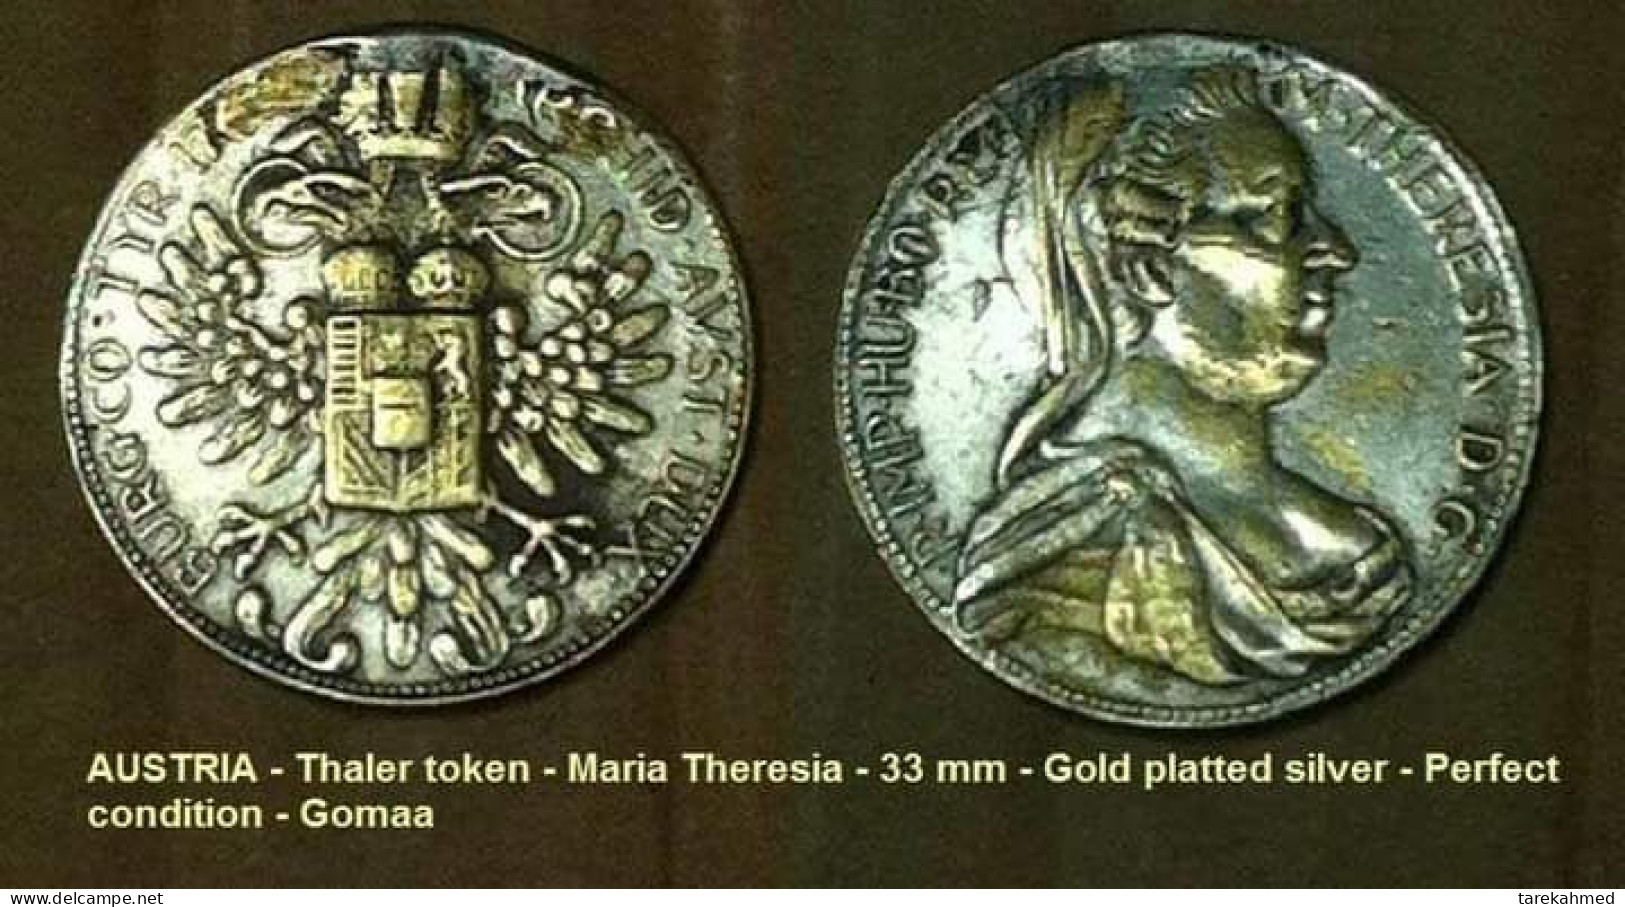 AUSTRIA - Thaler Medal - Maria Theresia, 1780, - 33 Mm - Gold Platted Silver - Perfect Condition.gomaa - Adel